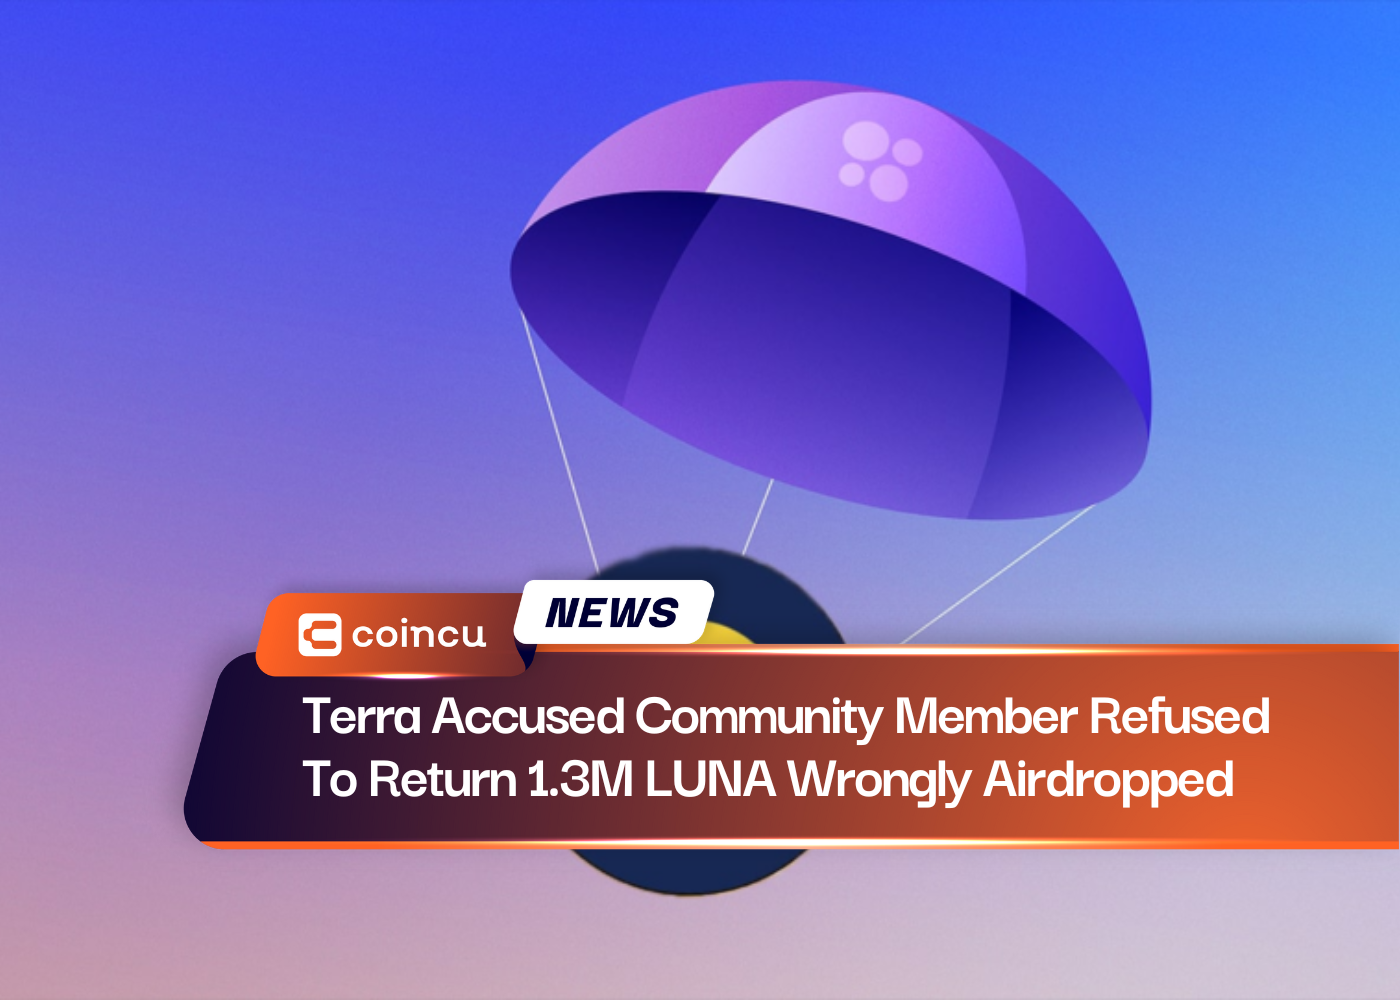 Terra Accused Community Member Refused To Return 1.3M LUNA Wrongly Airdropped